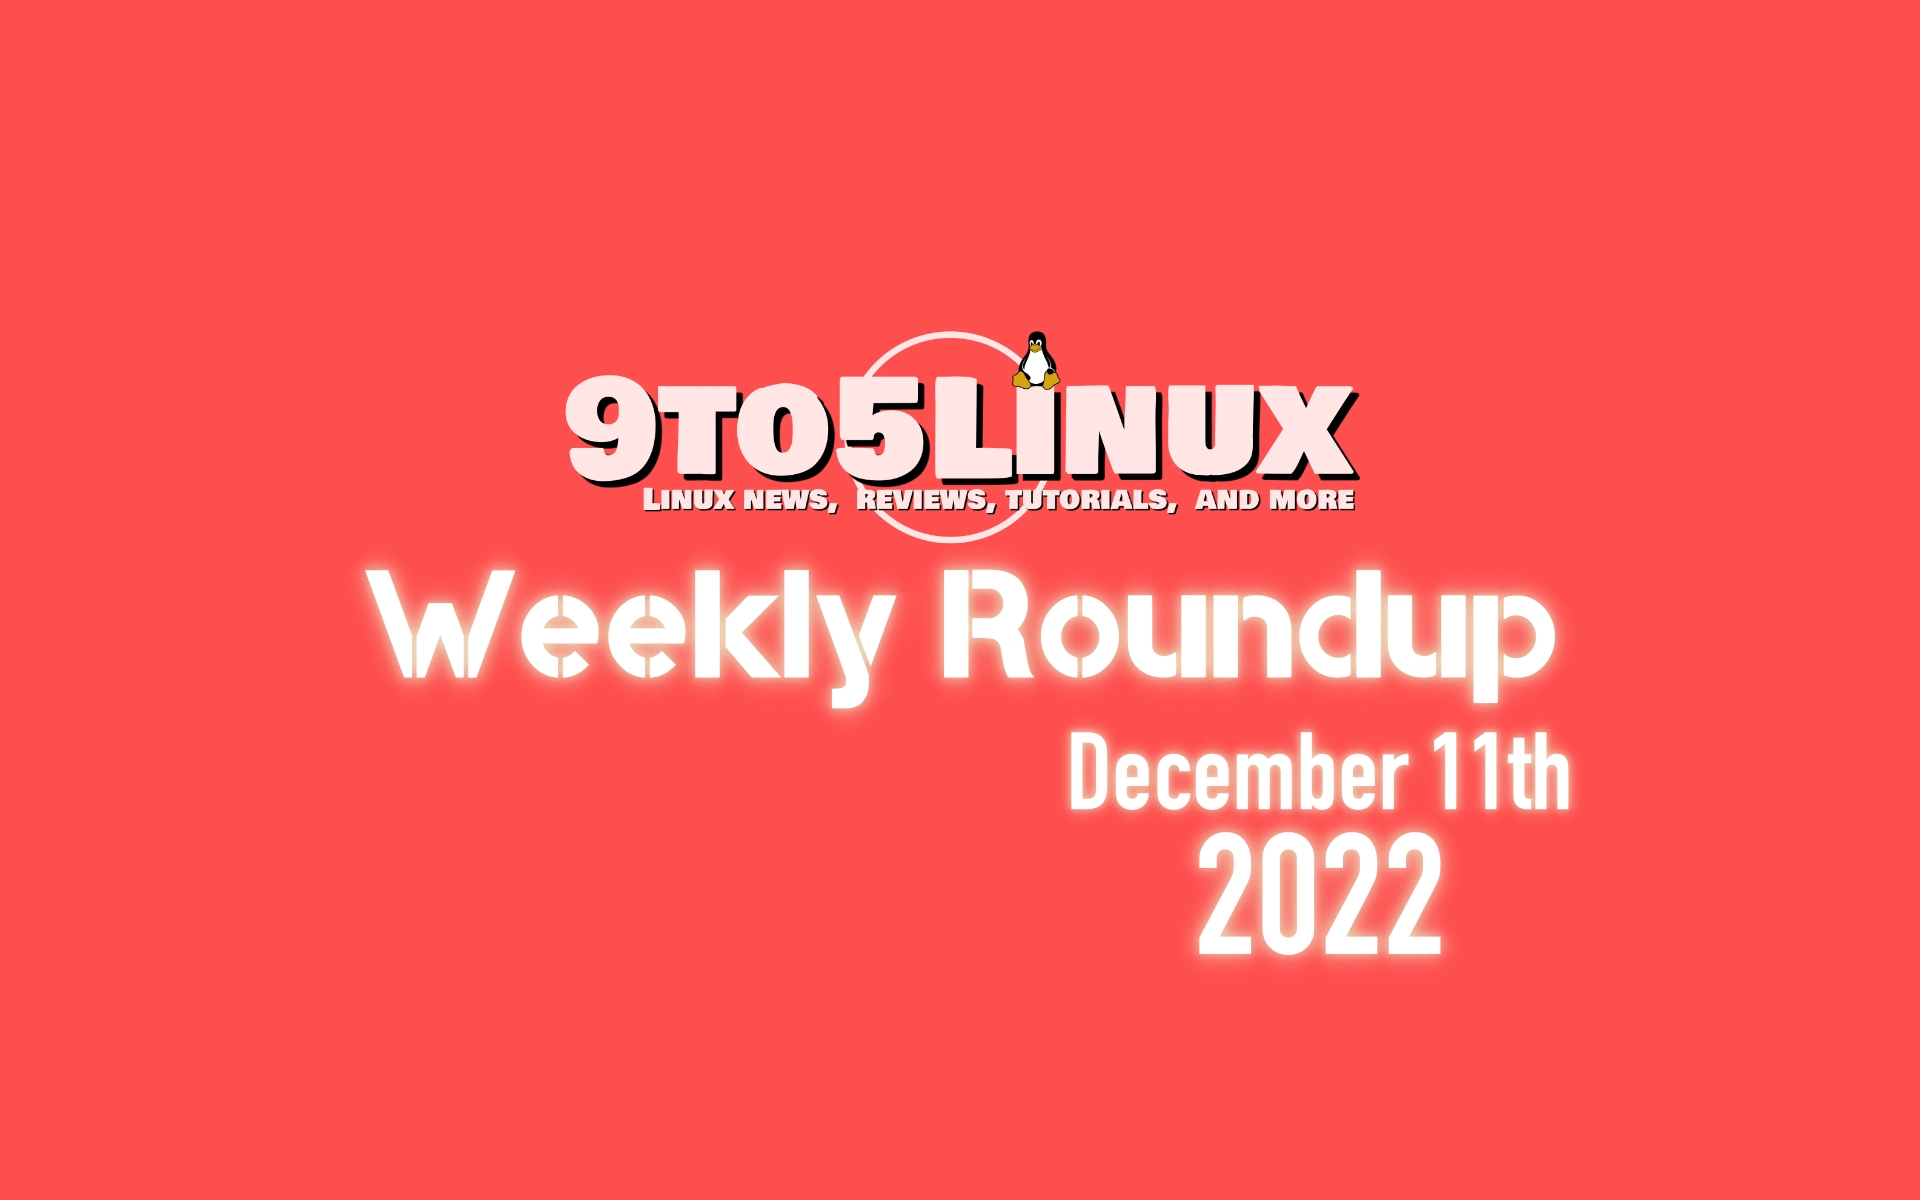 9to5Linux Weekly Roundup: December 11th, 2022